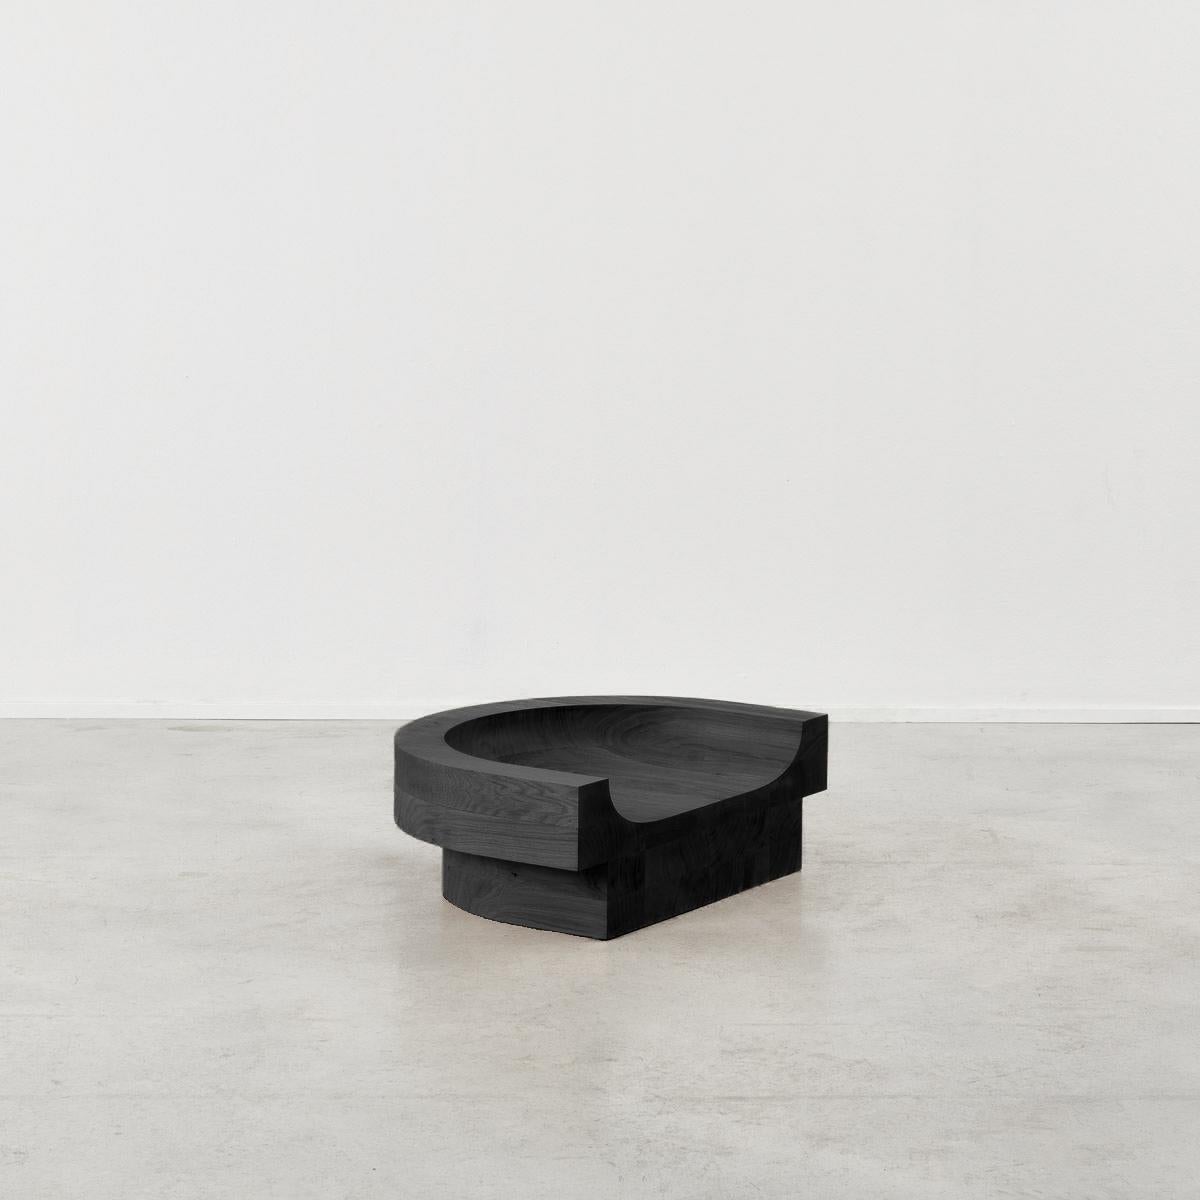 Edition of 8 + 1AP

‘Low Seat’ is a new work by architect, designer and maker Benni Allan exploring different ways of sitting. Part of his first full collection of furniture, Low Collection, exclusive to Béton Brut. And was inspired by recent